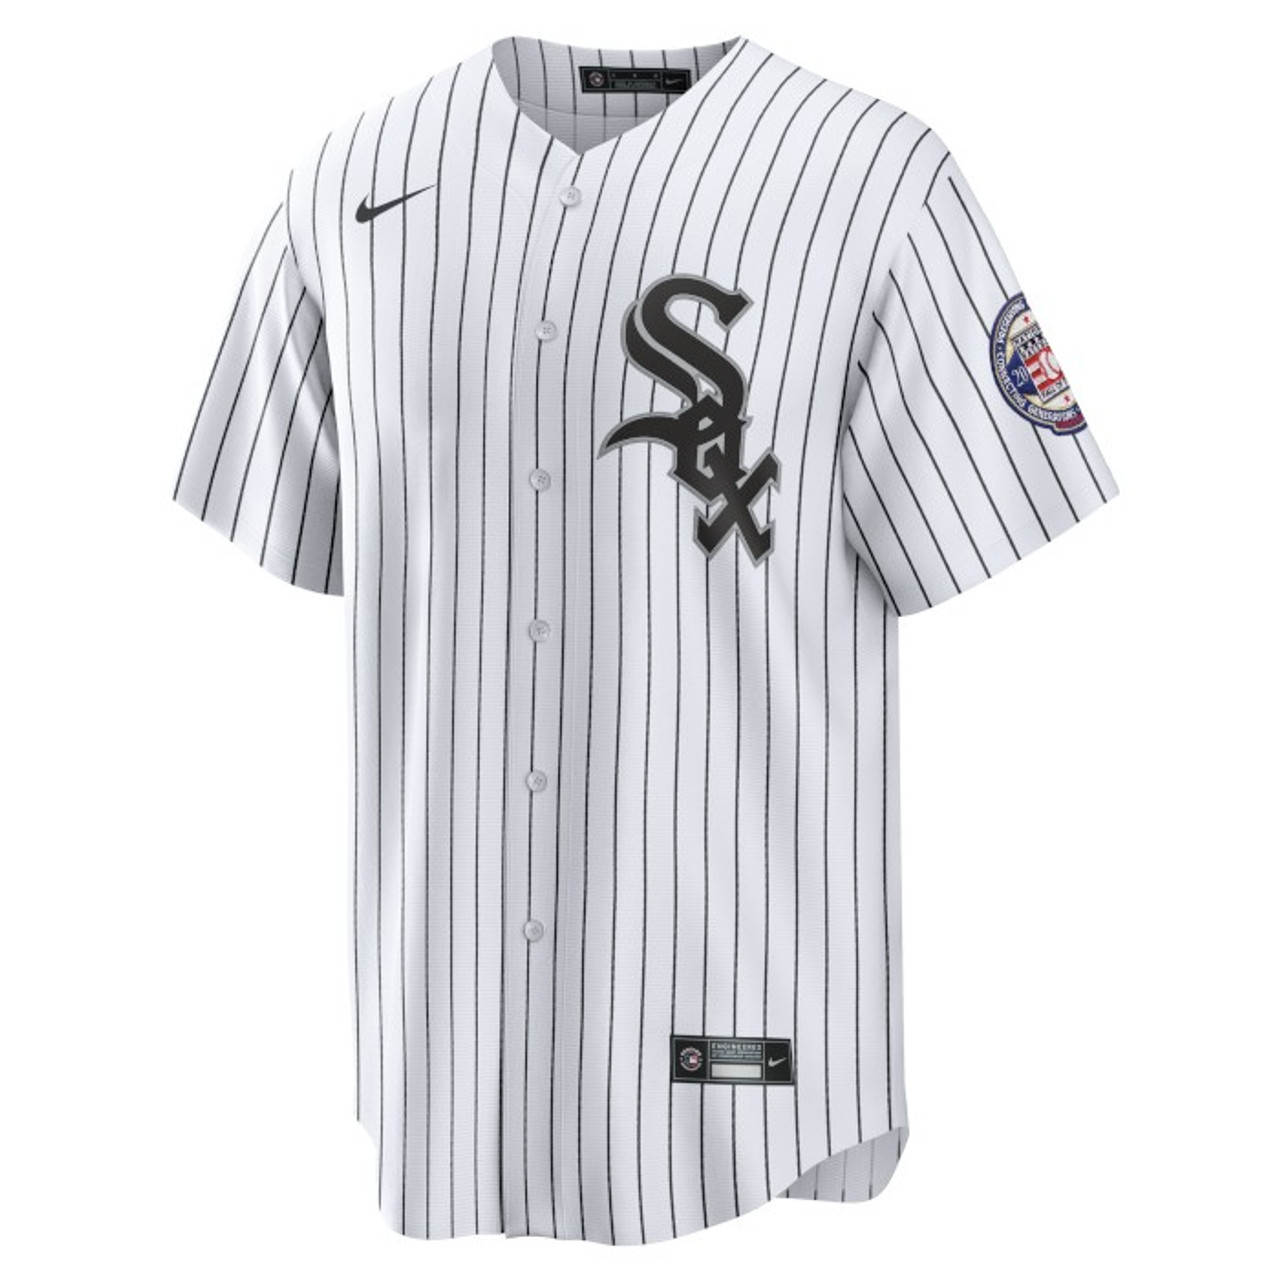 sox jersey patch